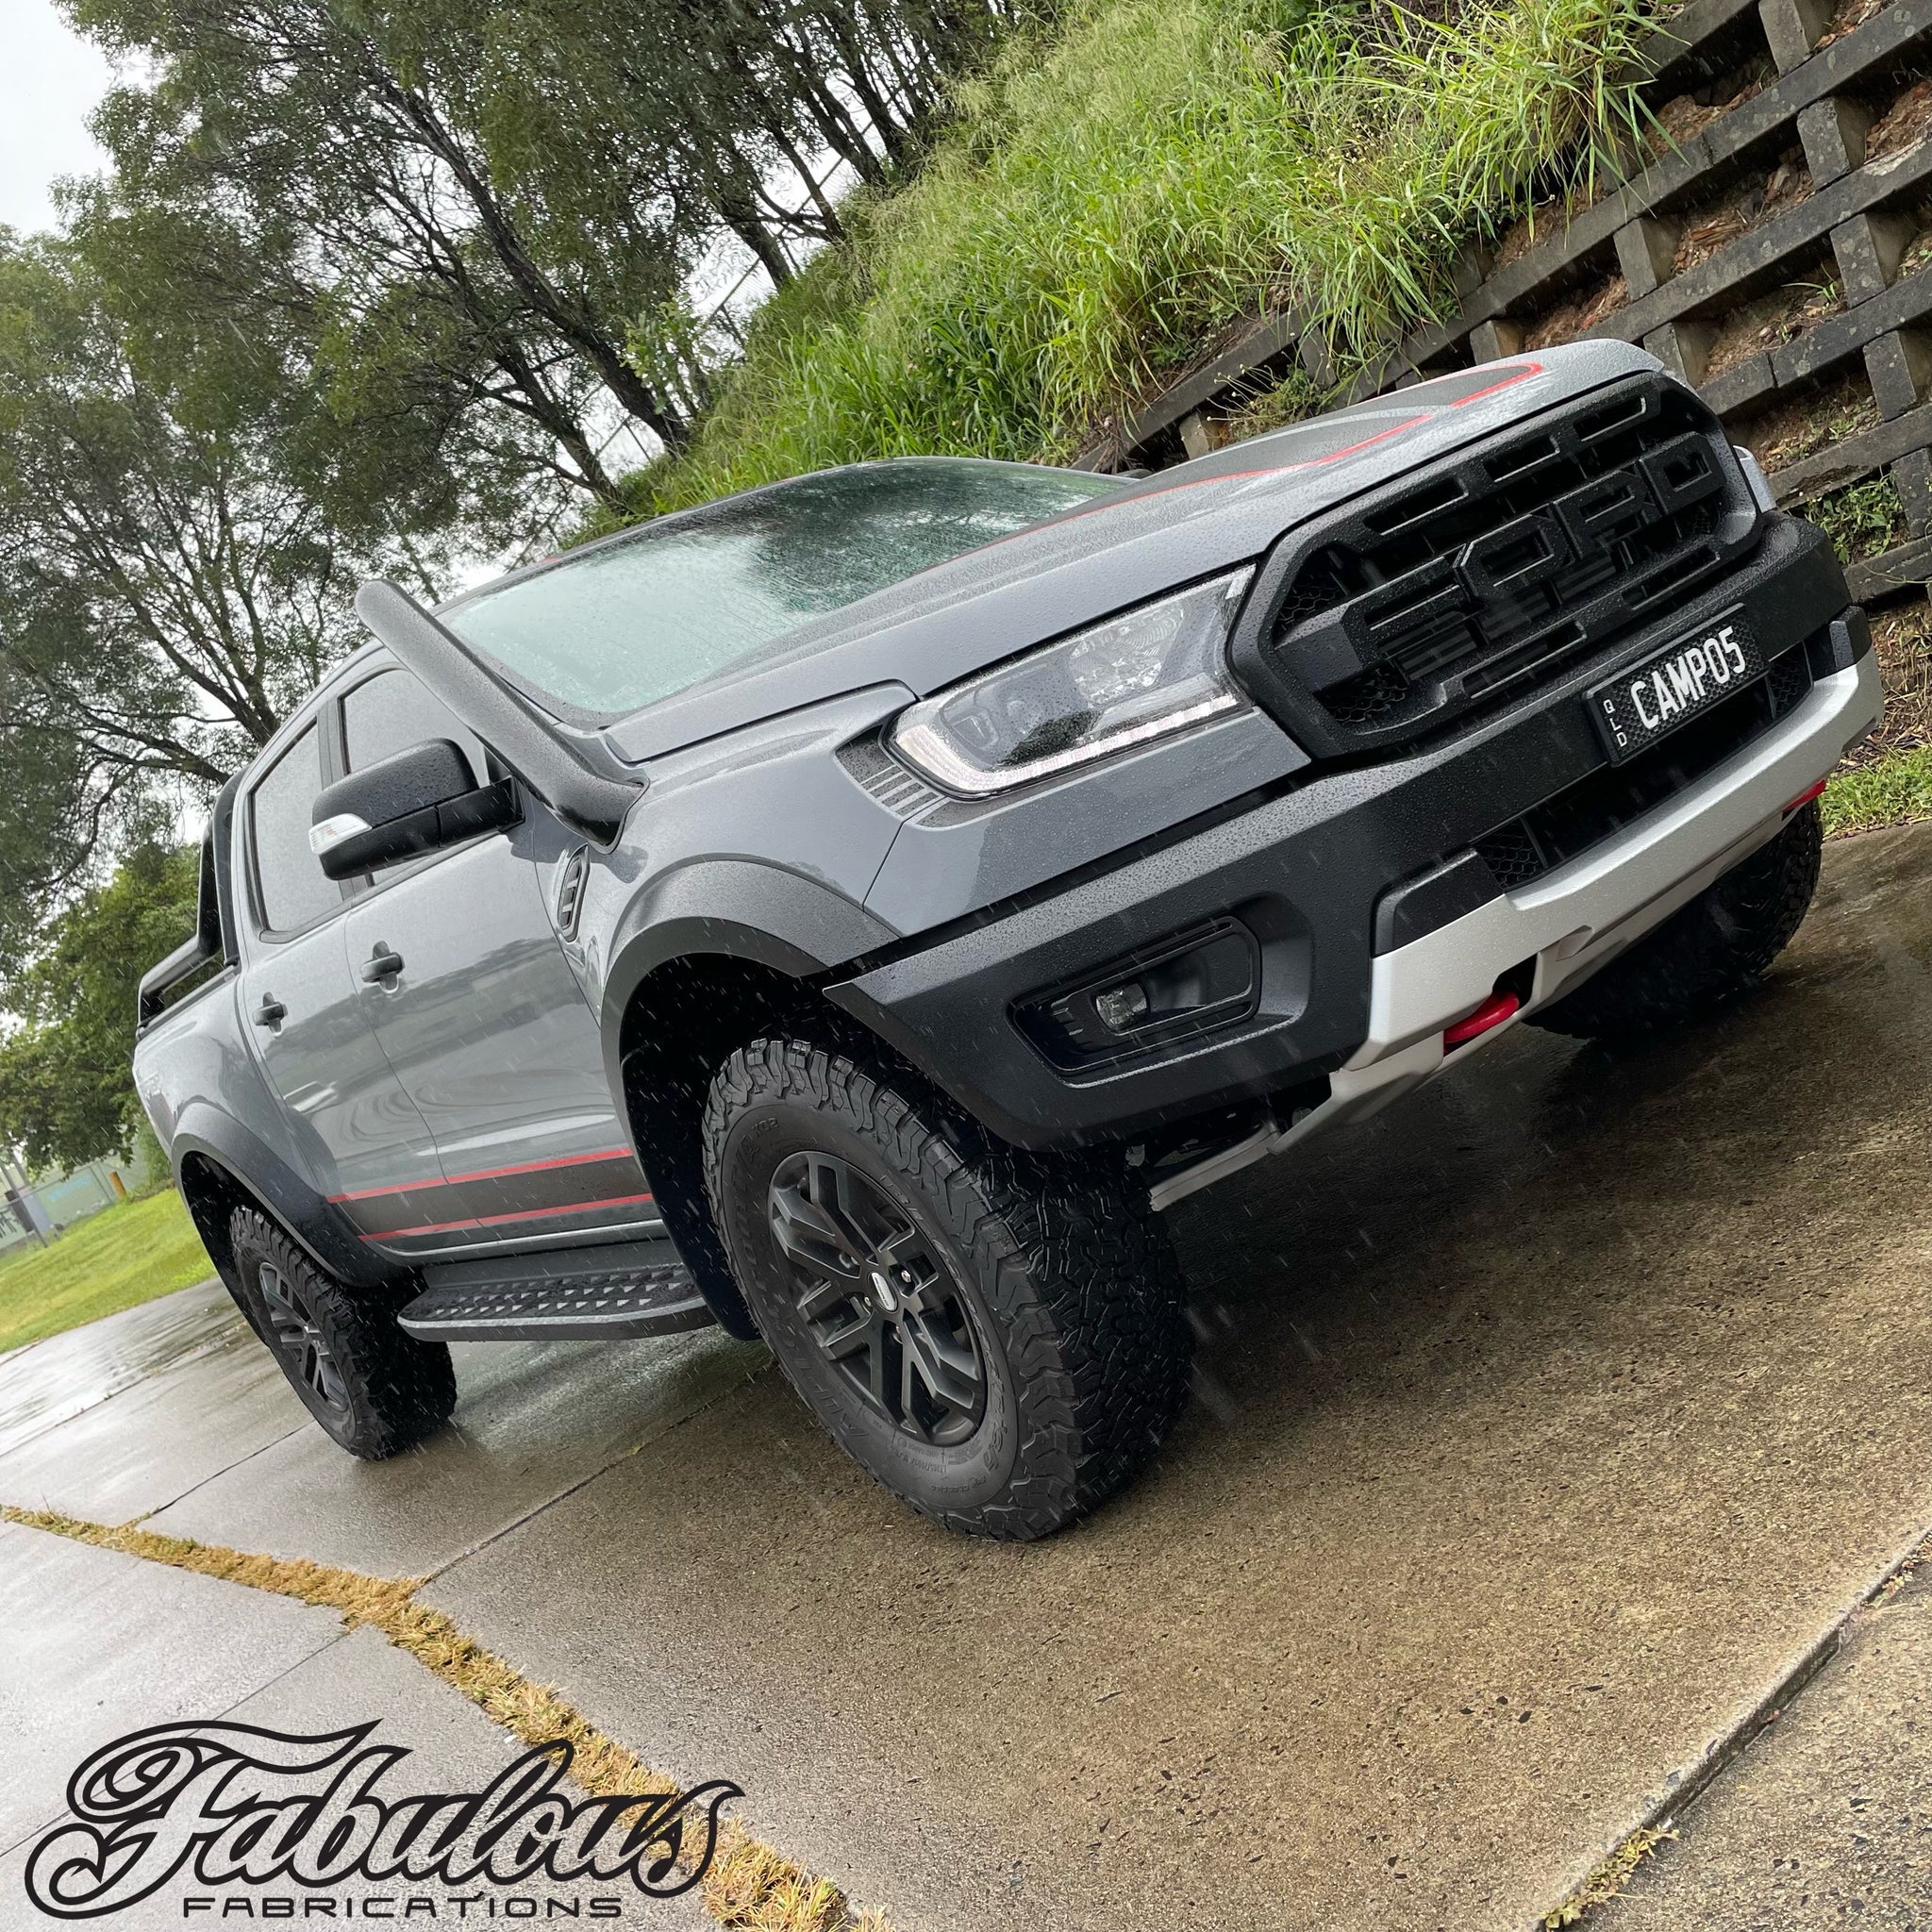 Ford Ranger Raptor Short Entry Stainless Snorkel and Factory Airbox* Kit